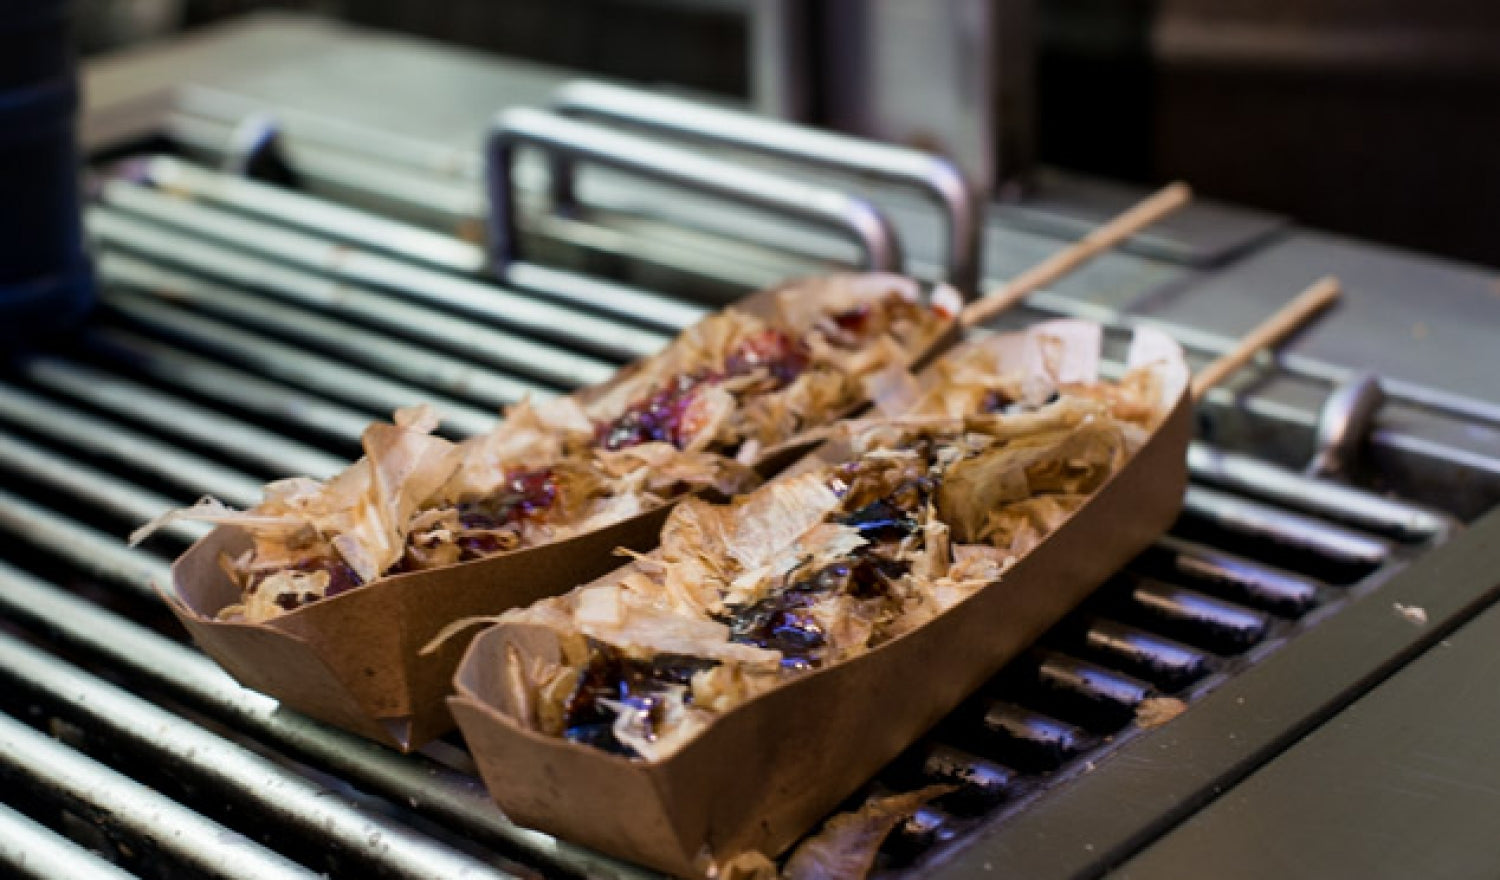 Korean Street Food To Try At Home: Octopus On A Stick